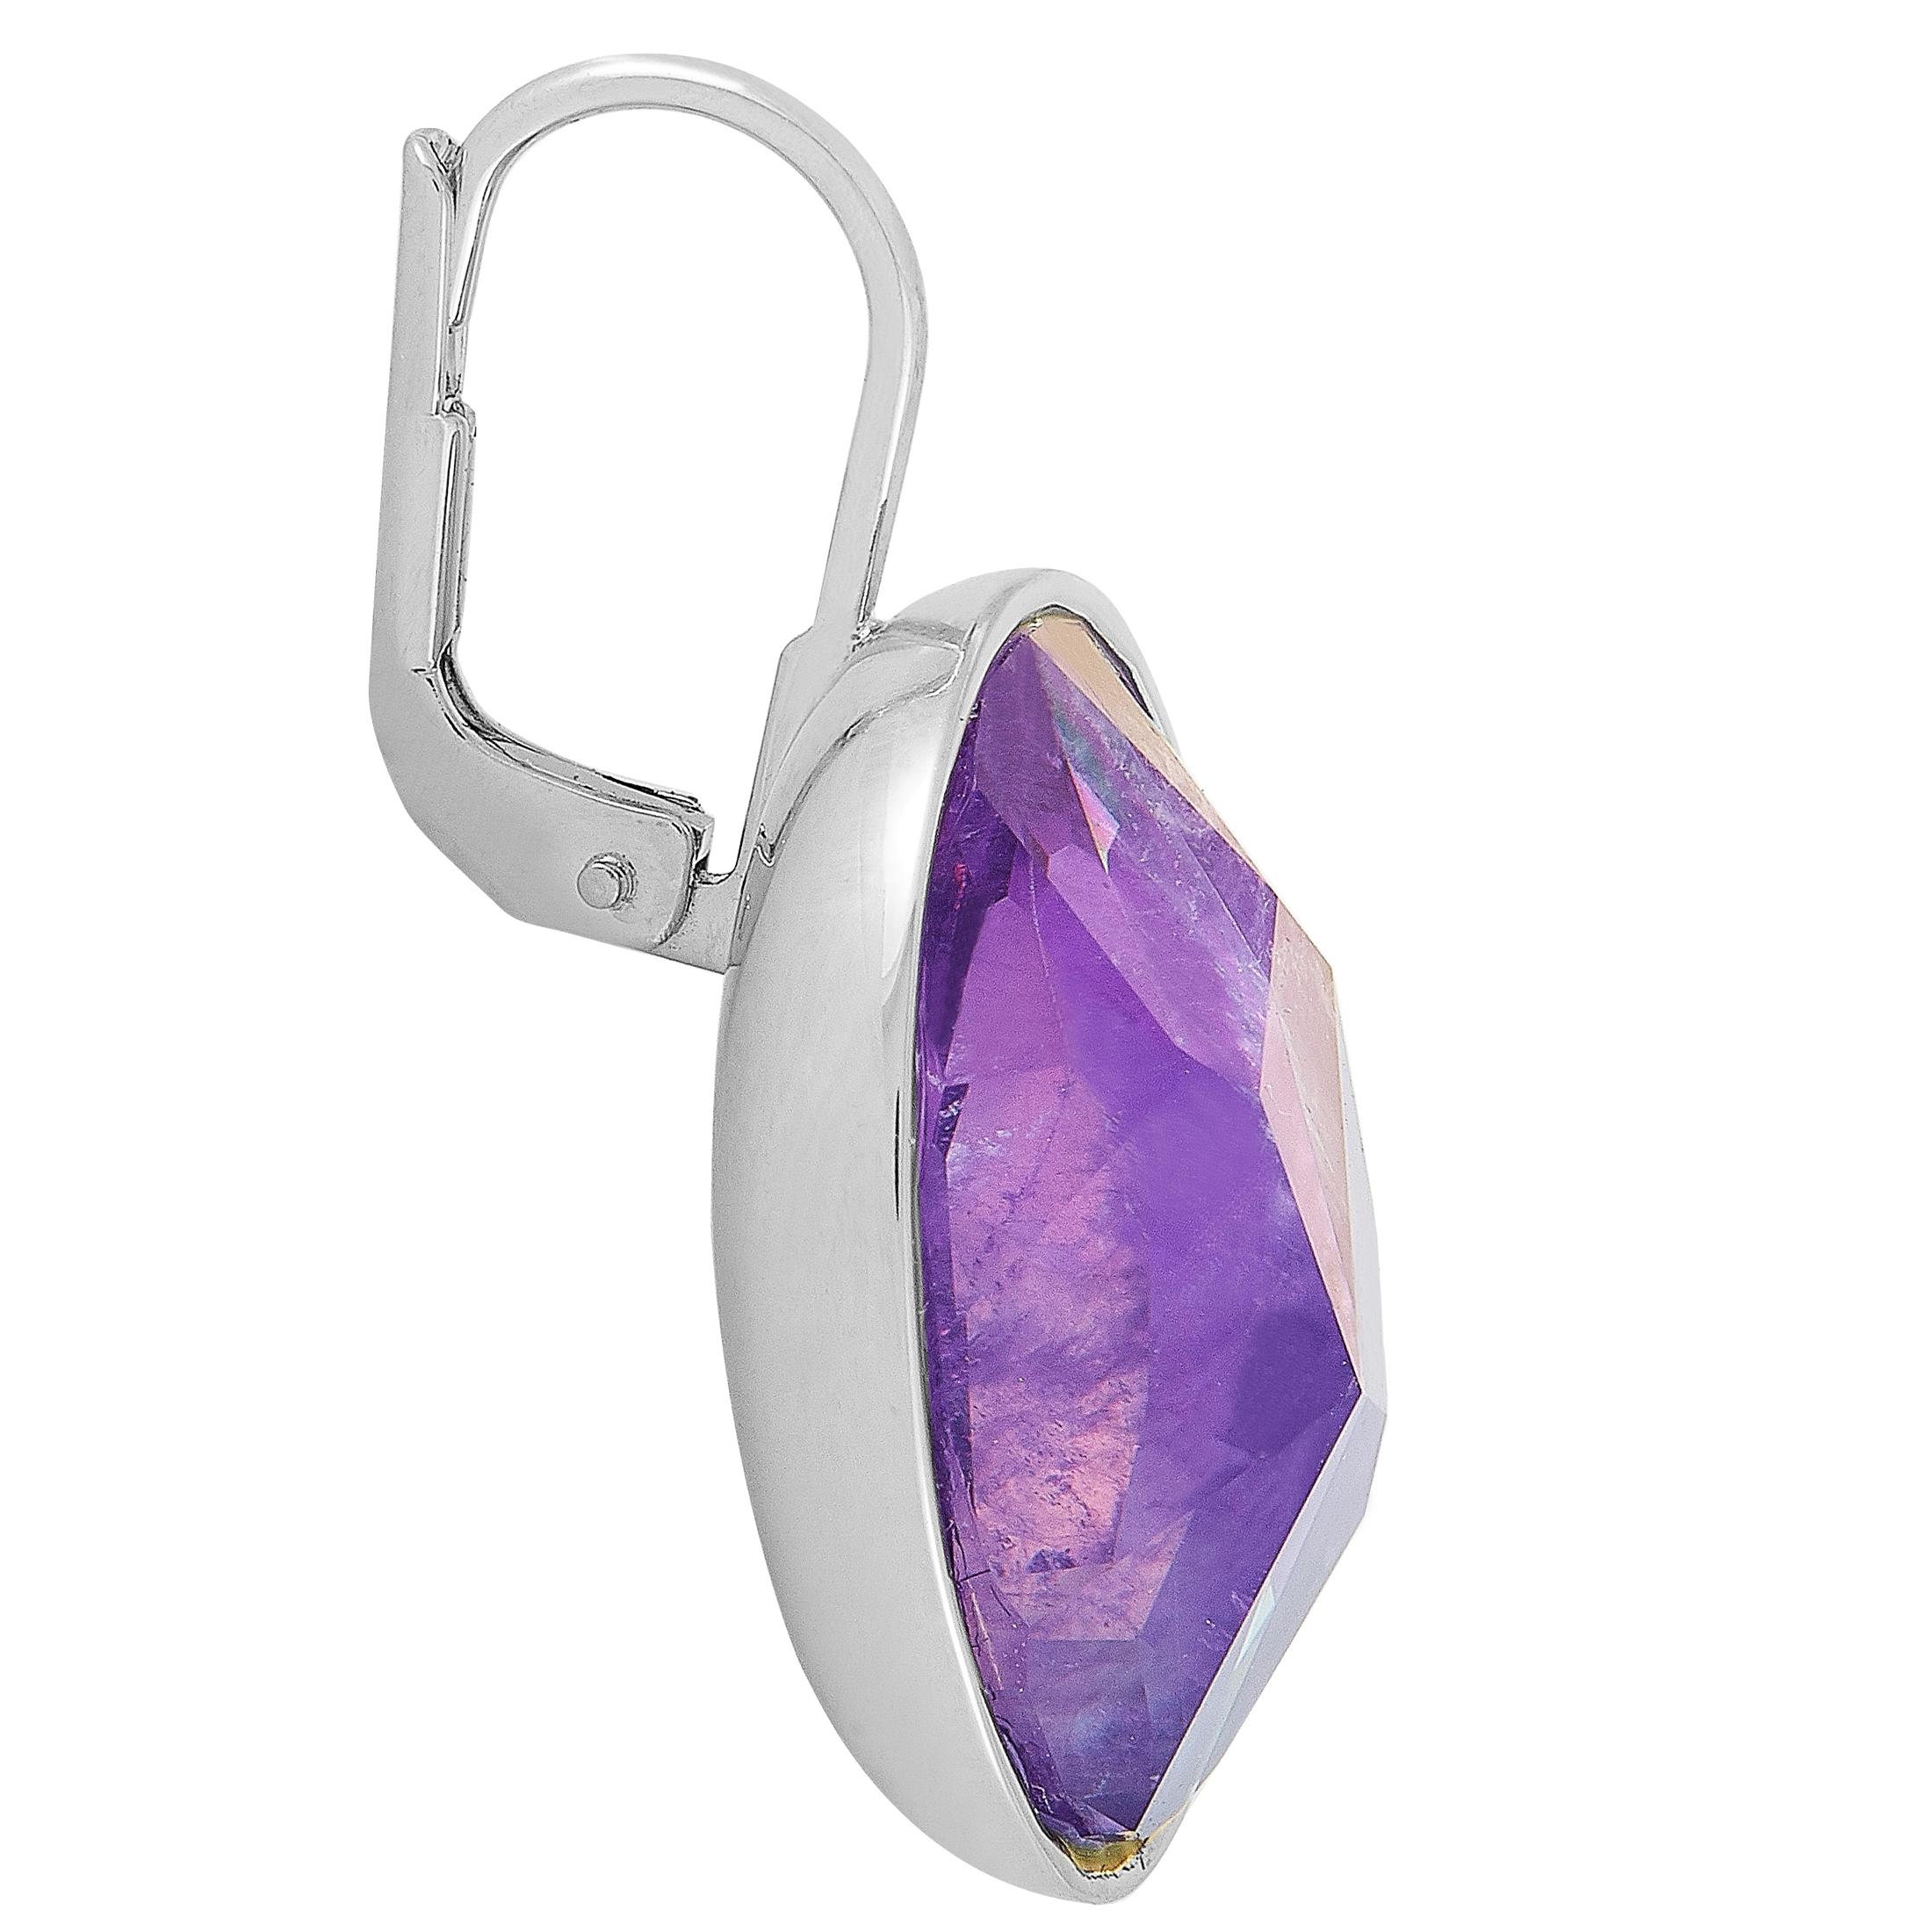 The Swarovski “Oval” earrings are crafted from rhodium-plated stainless steel and set with purple Swarovski crystals. The earrings measure 1.12” in length and 0.62” in width, and each of the two weighs 5.6 grams.